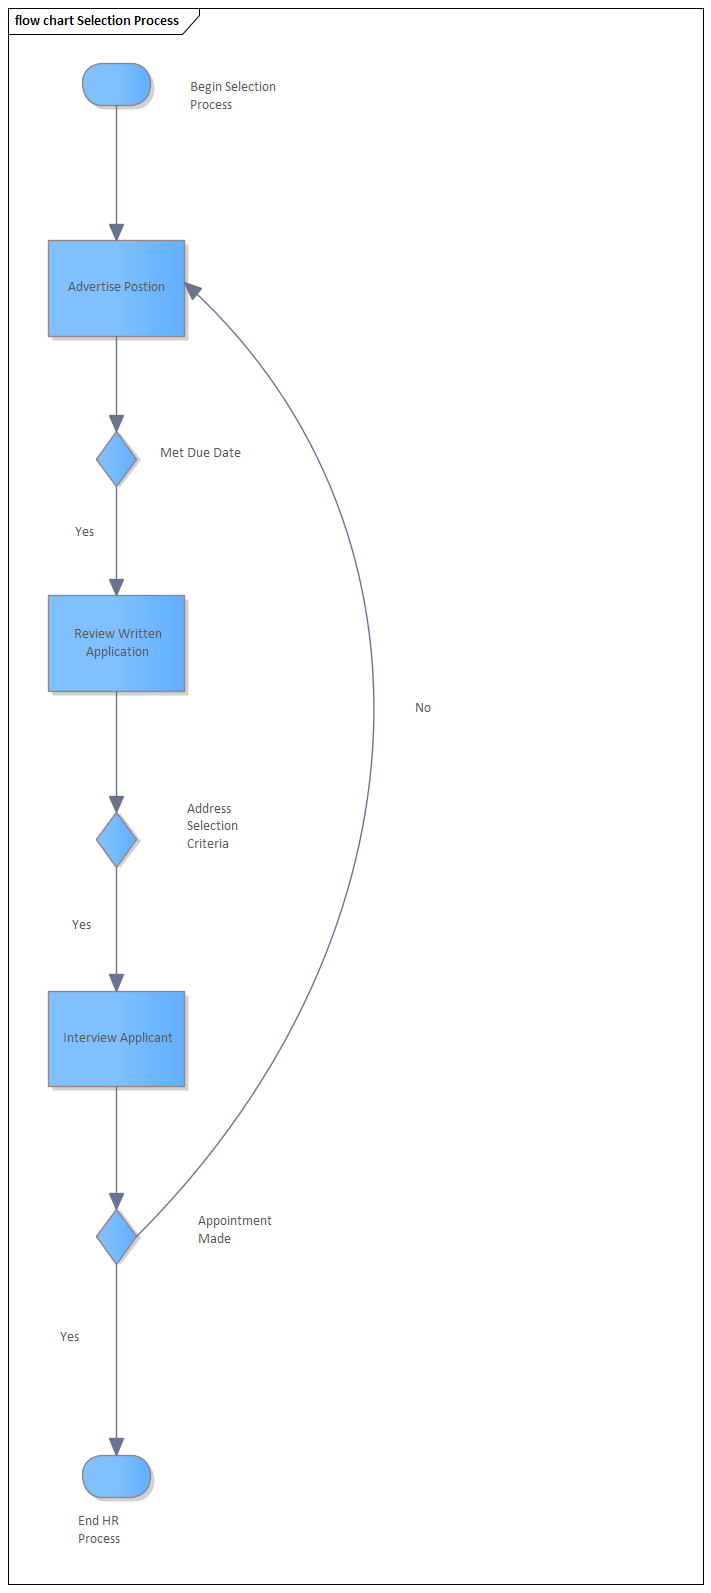 Example Flow chart for staff selection, modeled in Sparx Systems Enterprise Architect